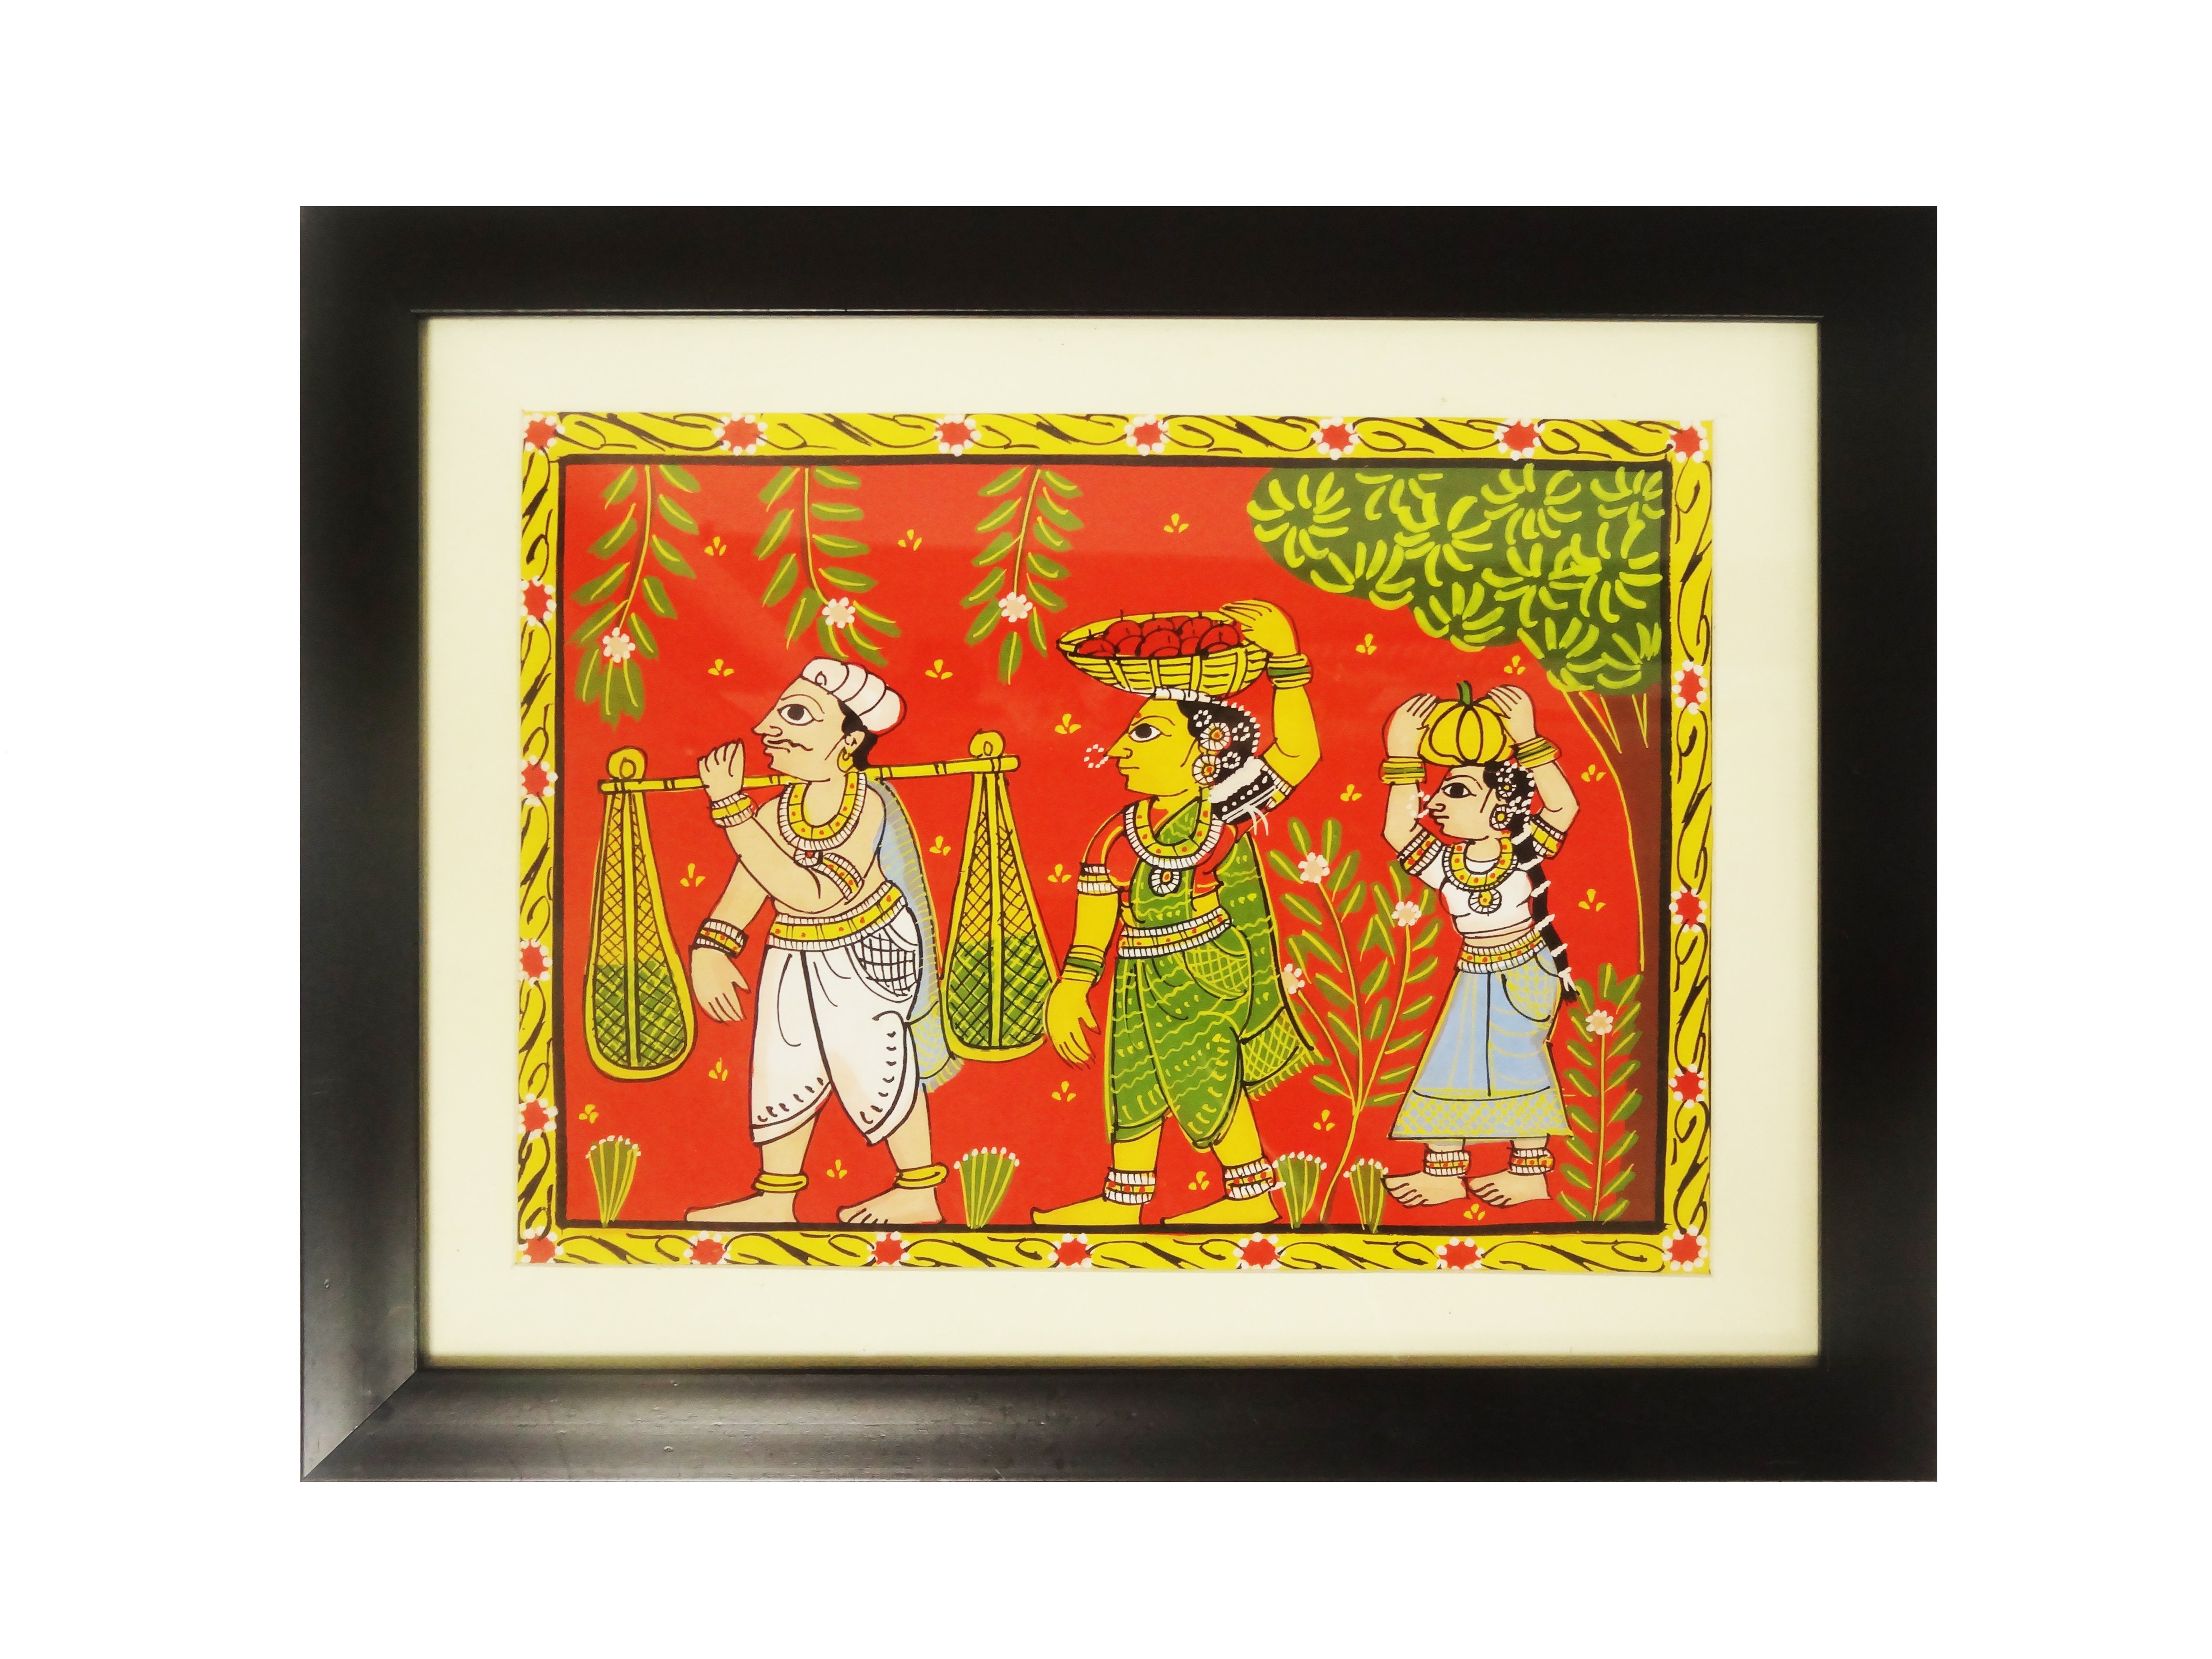 Cheriyal Hand Painting Wall Hanging Villagers off to Work with Fiber Frame 15"x12"